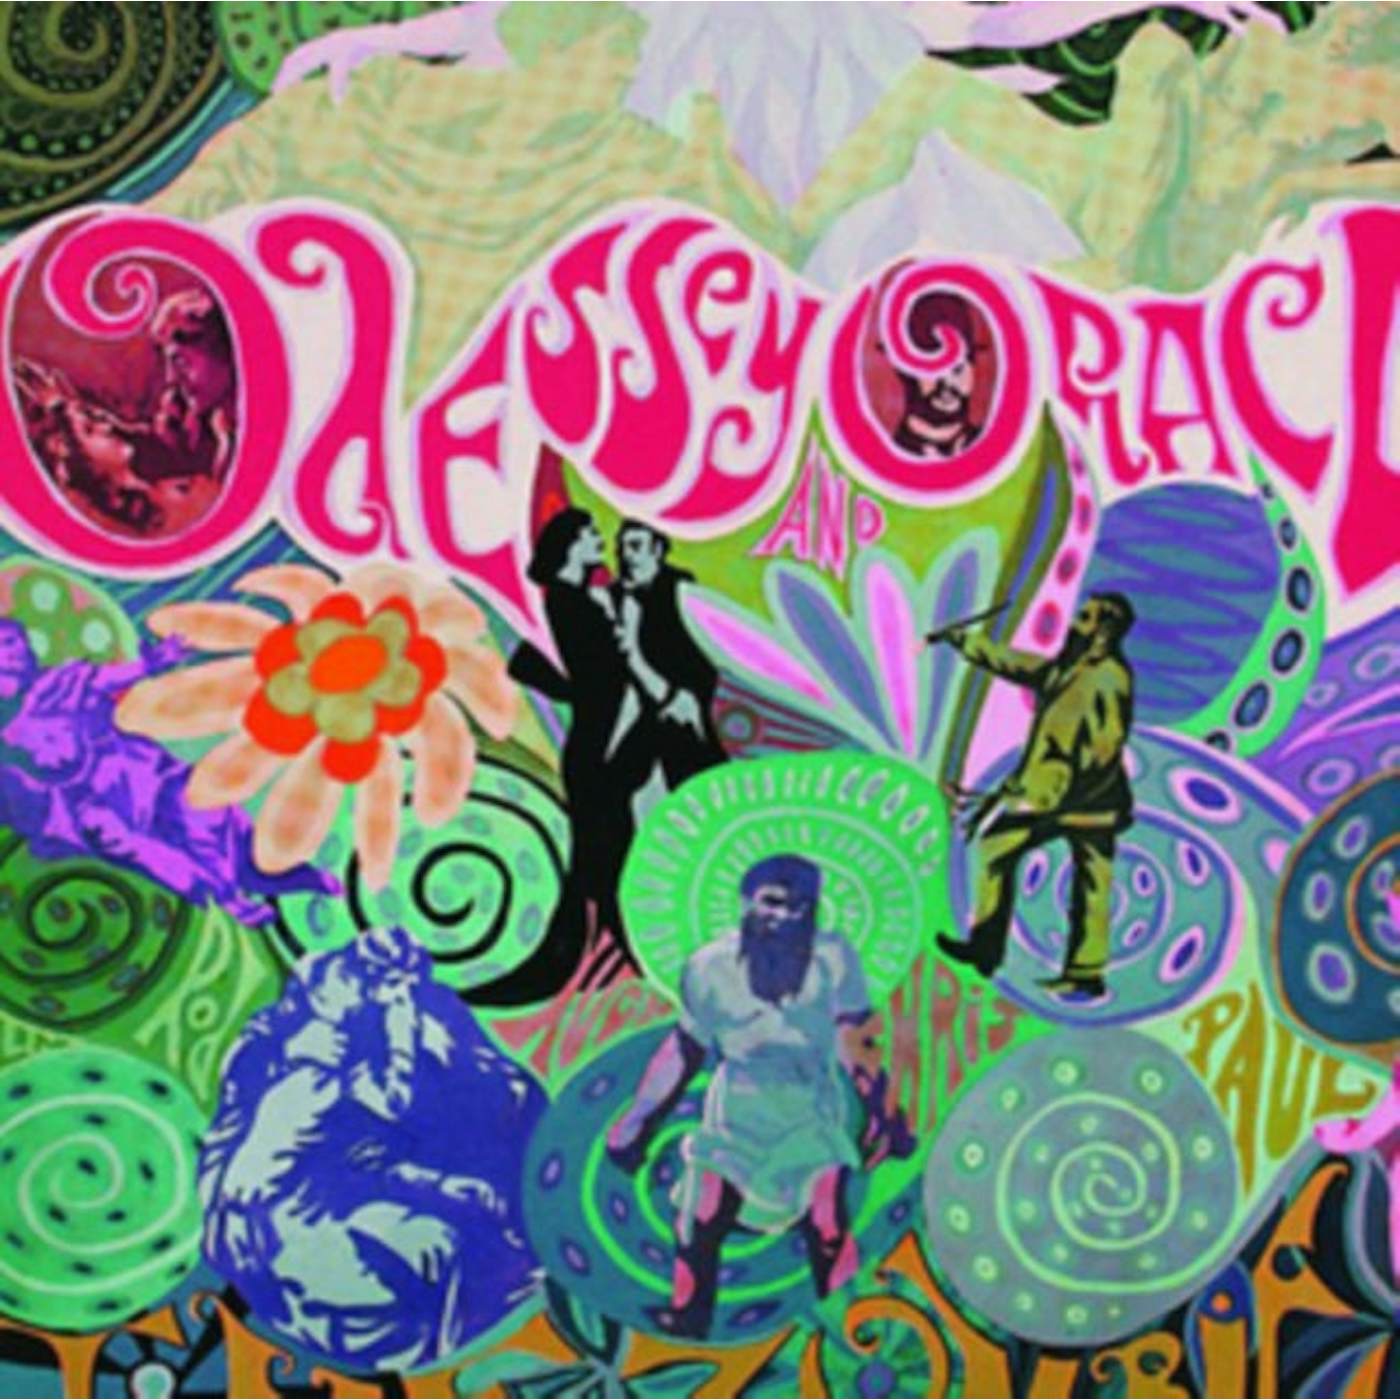 The Zombies LP Vinyl Record - Odessey And Oracle